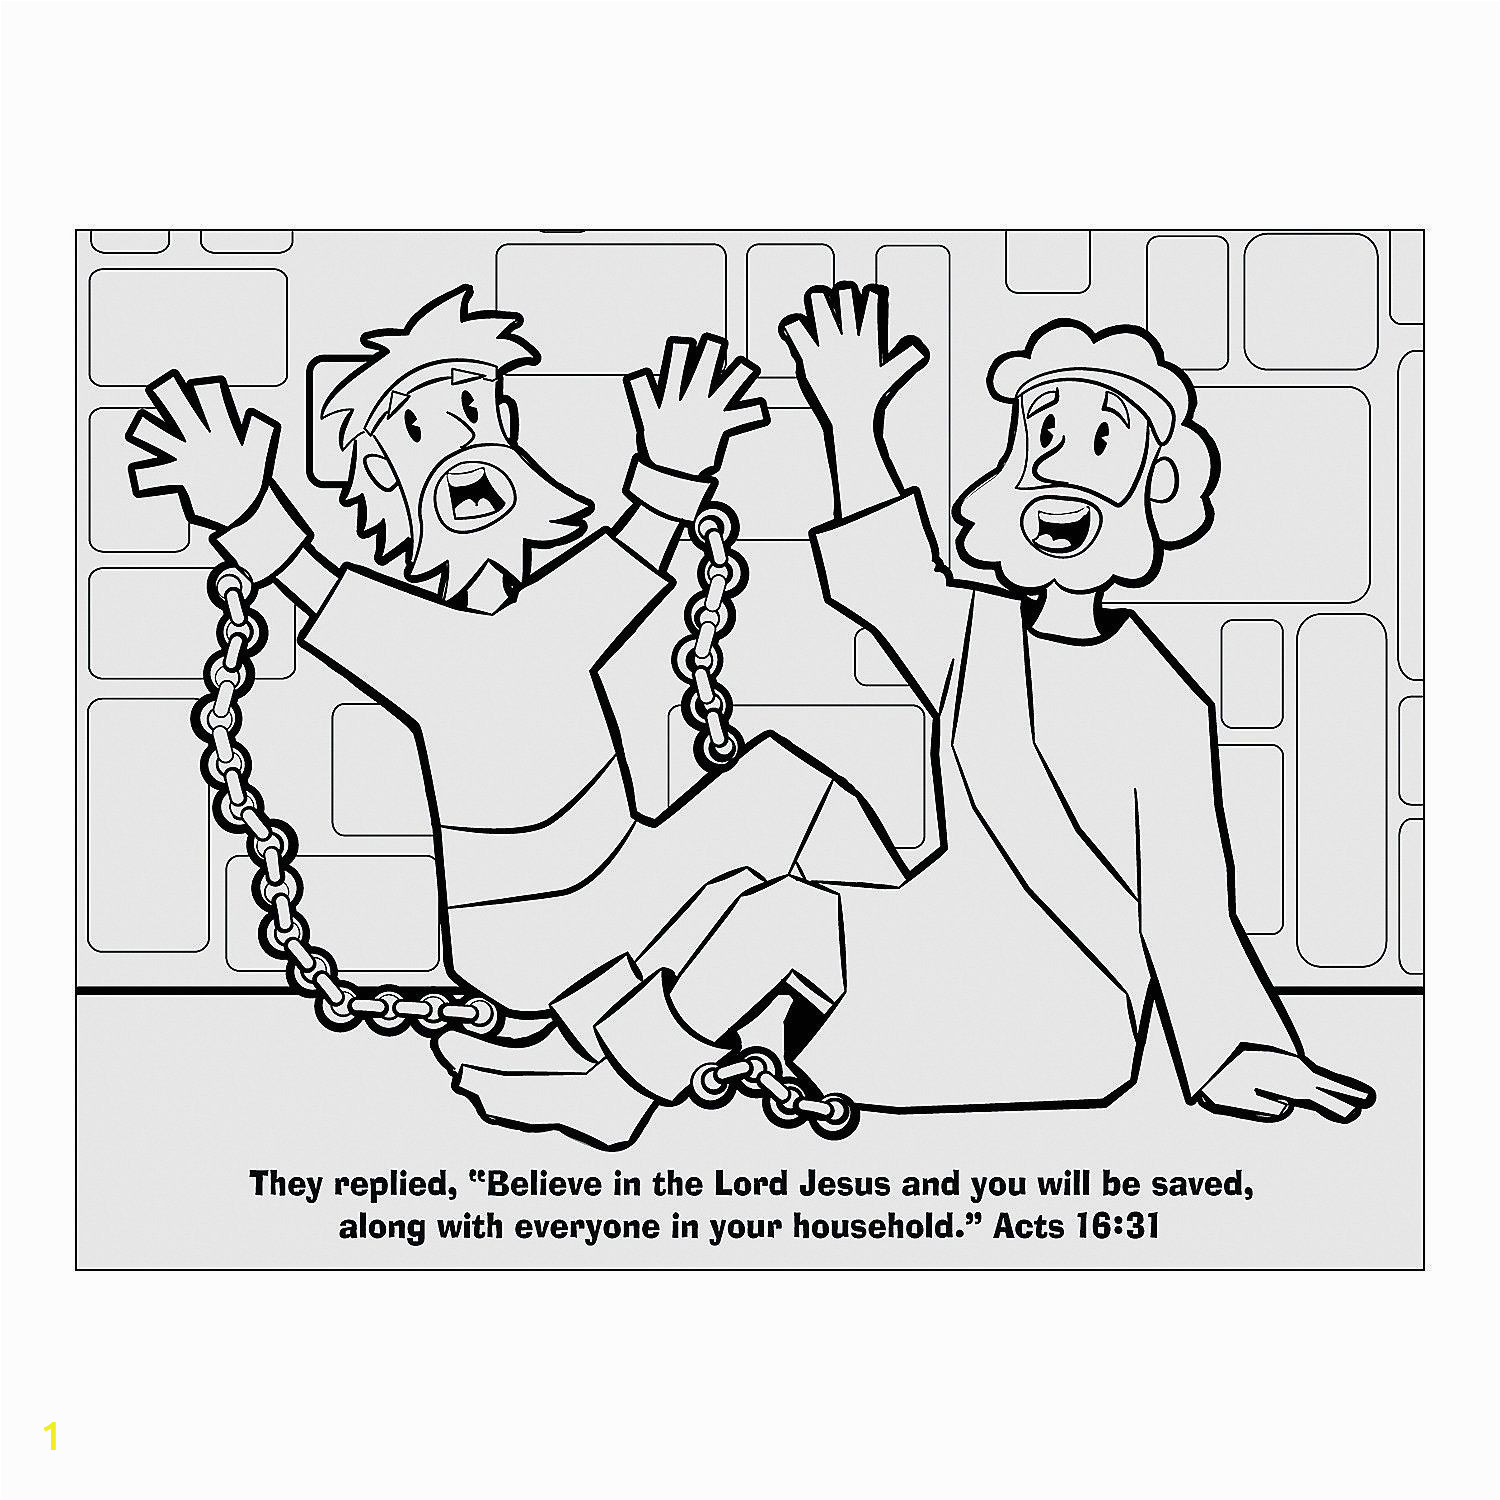 Paul and Silas Bible Coloring Pages Paul and Silas Coloring Sheet